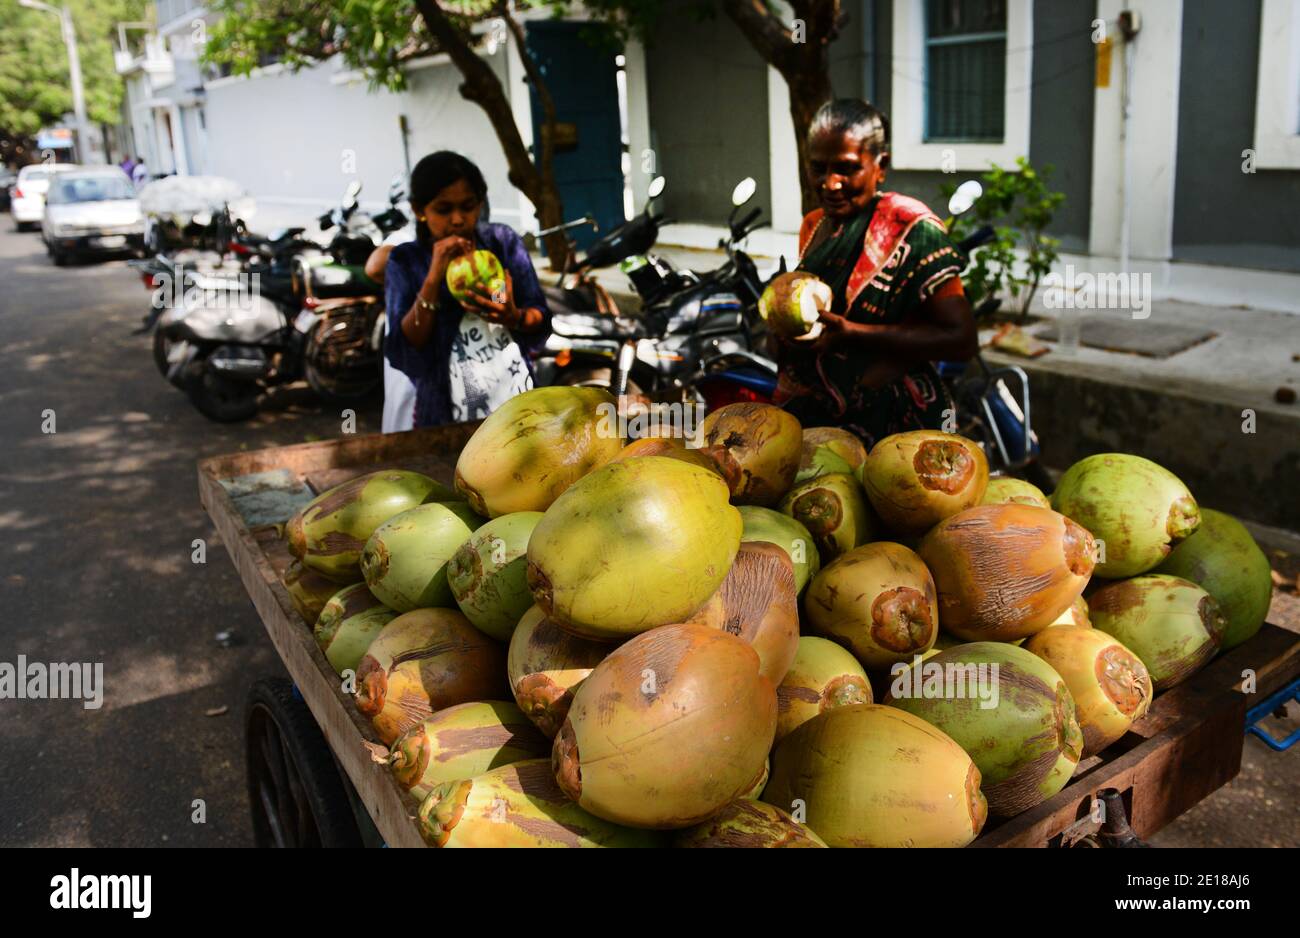 A green coconut for drinking vendor in Pondicherry, India. Stock Photo